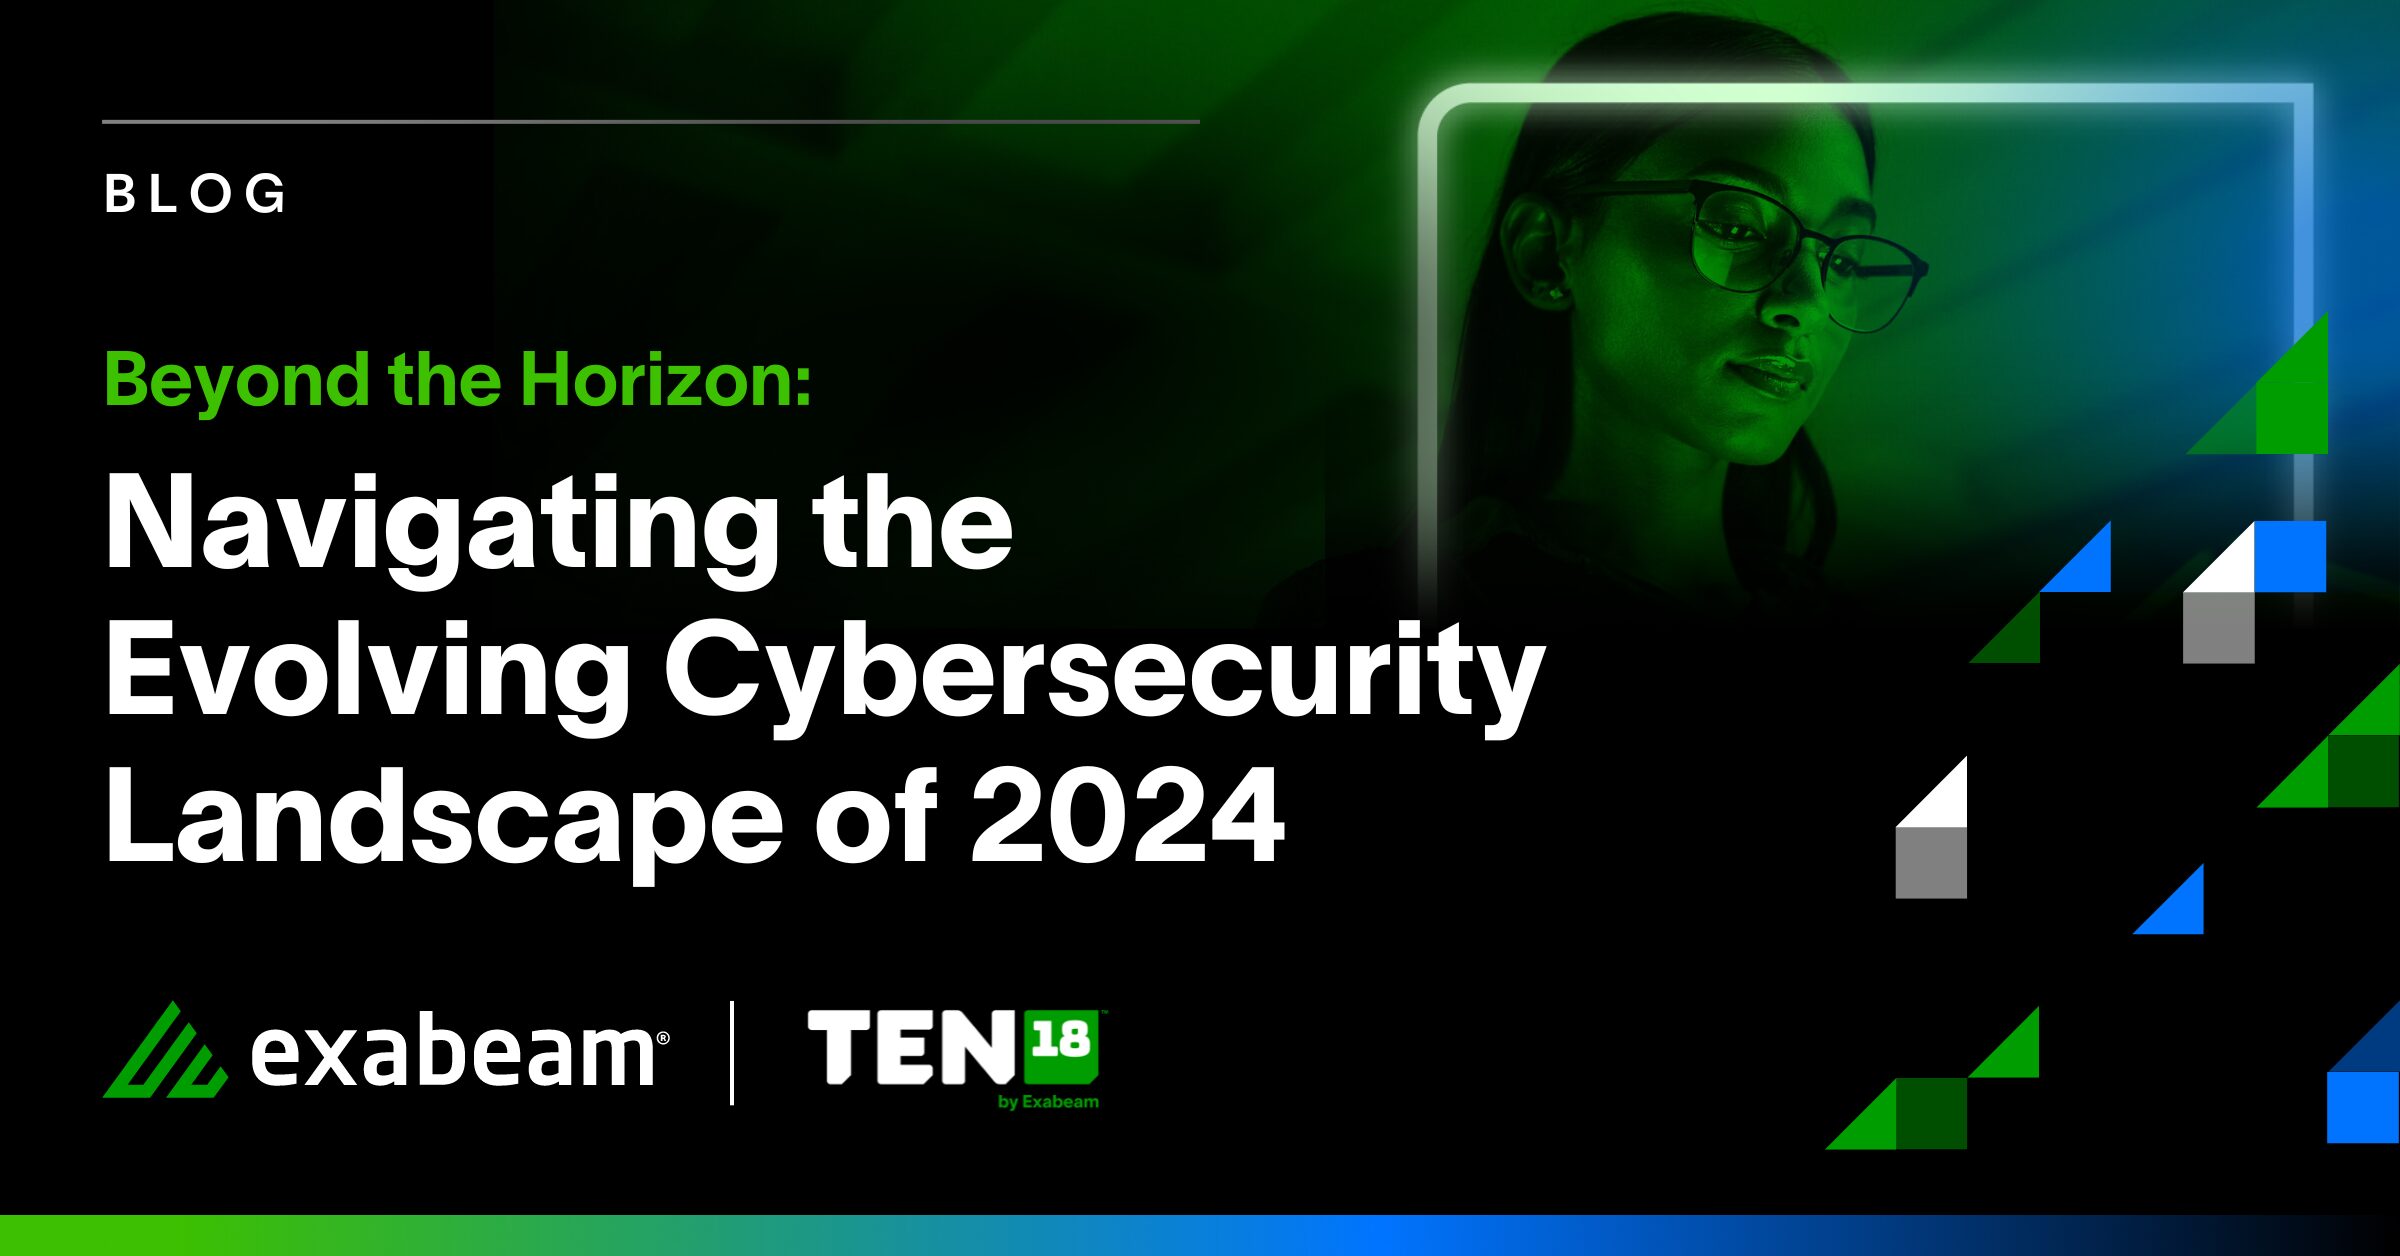 Beyond the Horizon: Navigating the Evolving Cybersecurity Landscape of 2024